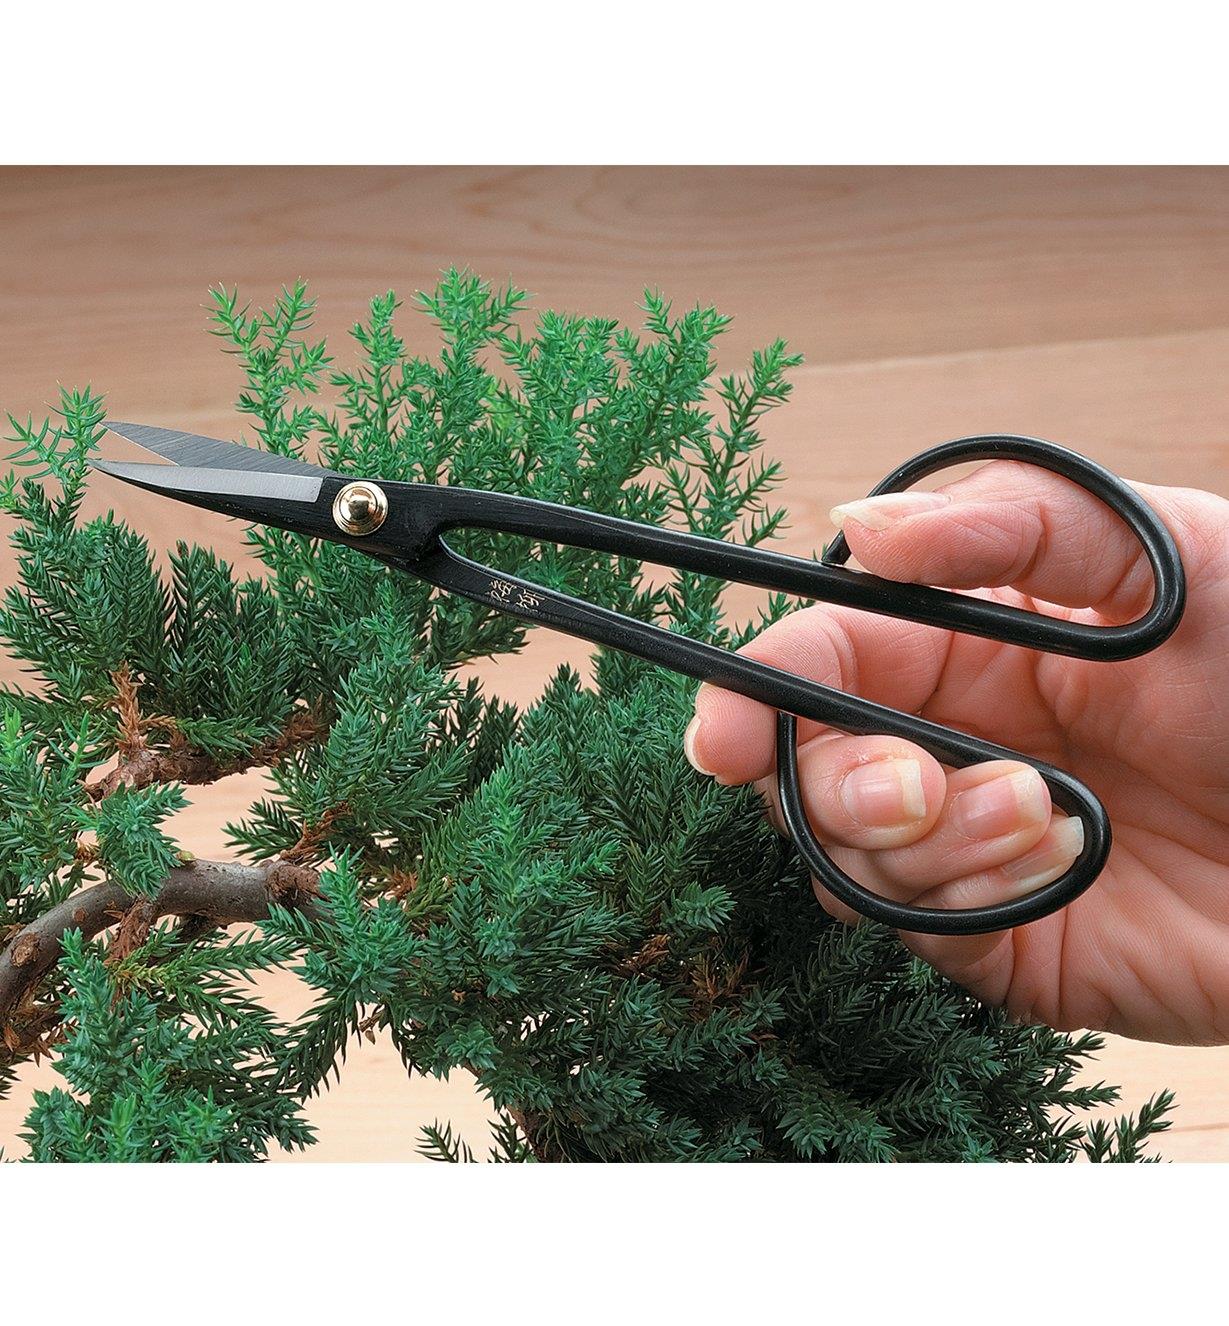 Trimming a bonsai tree with Long-Handled Trimming Shears